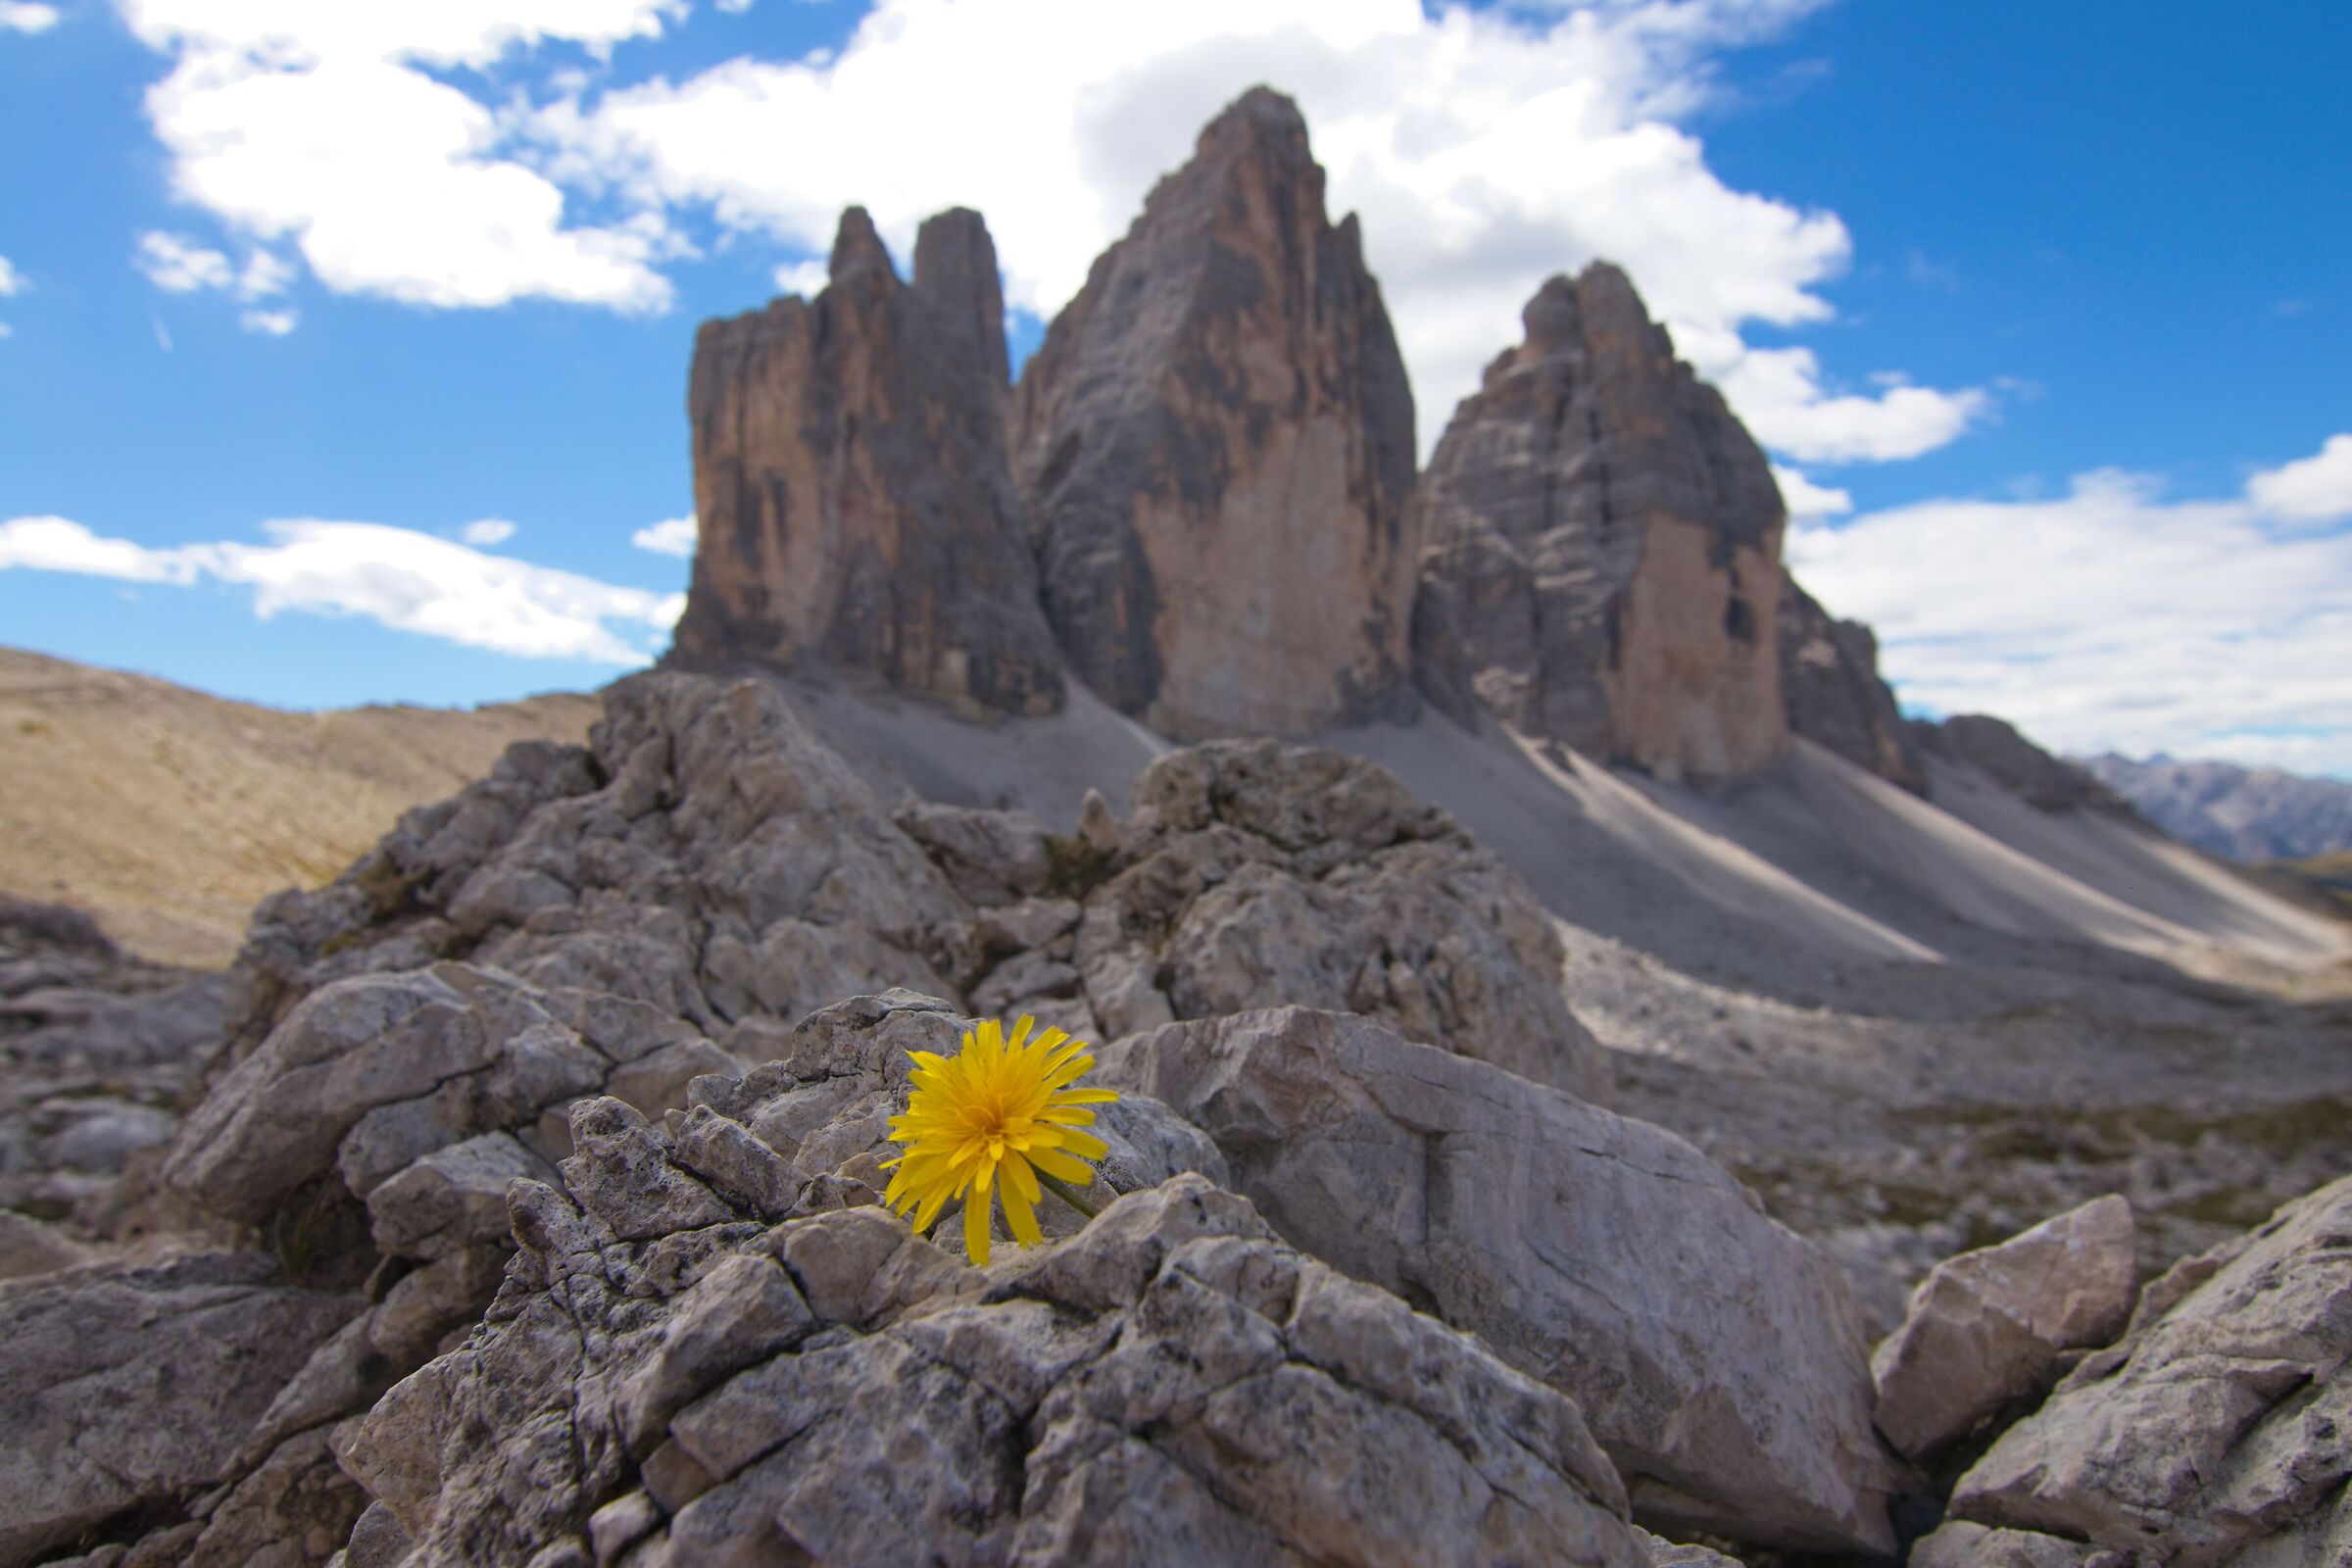 A flower among the peaks...